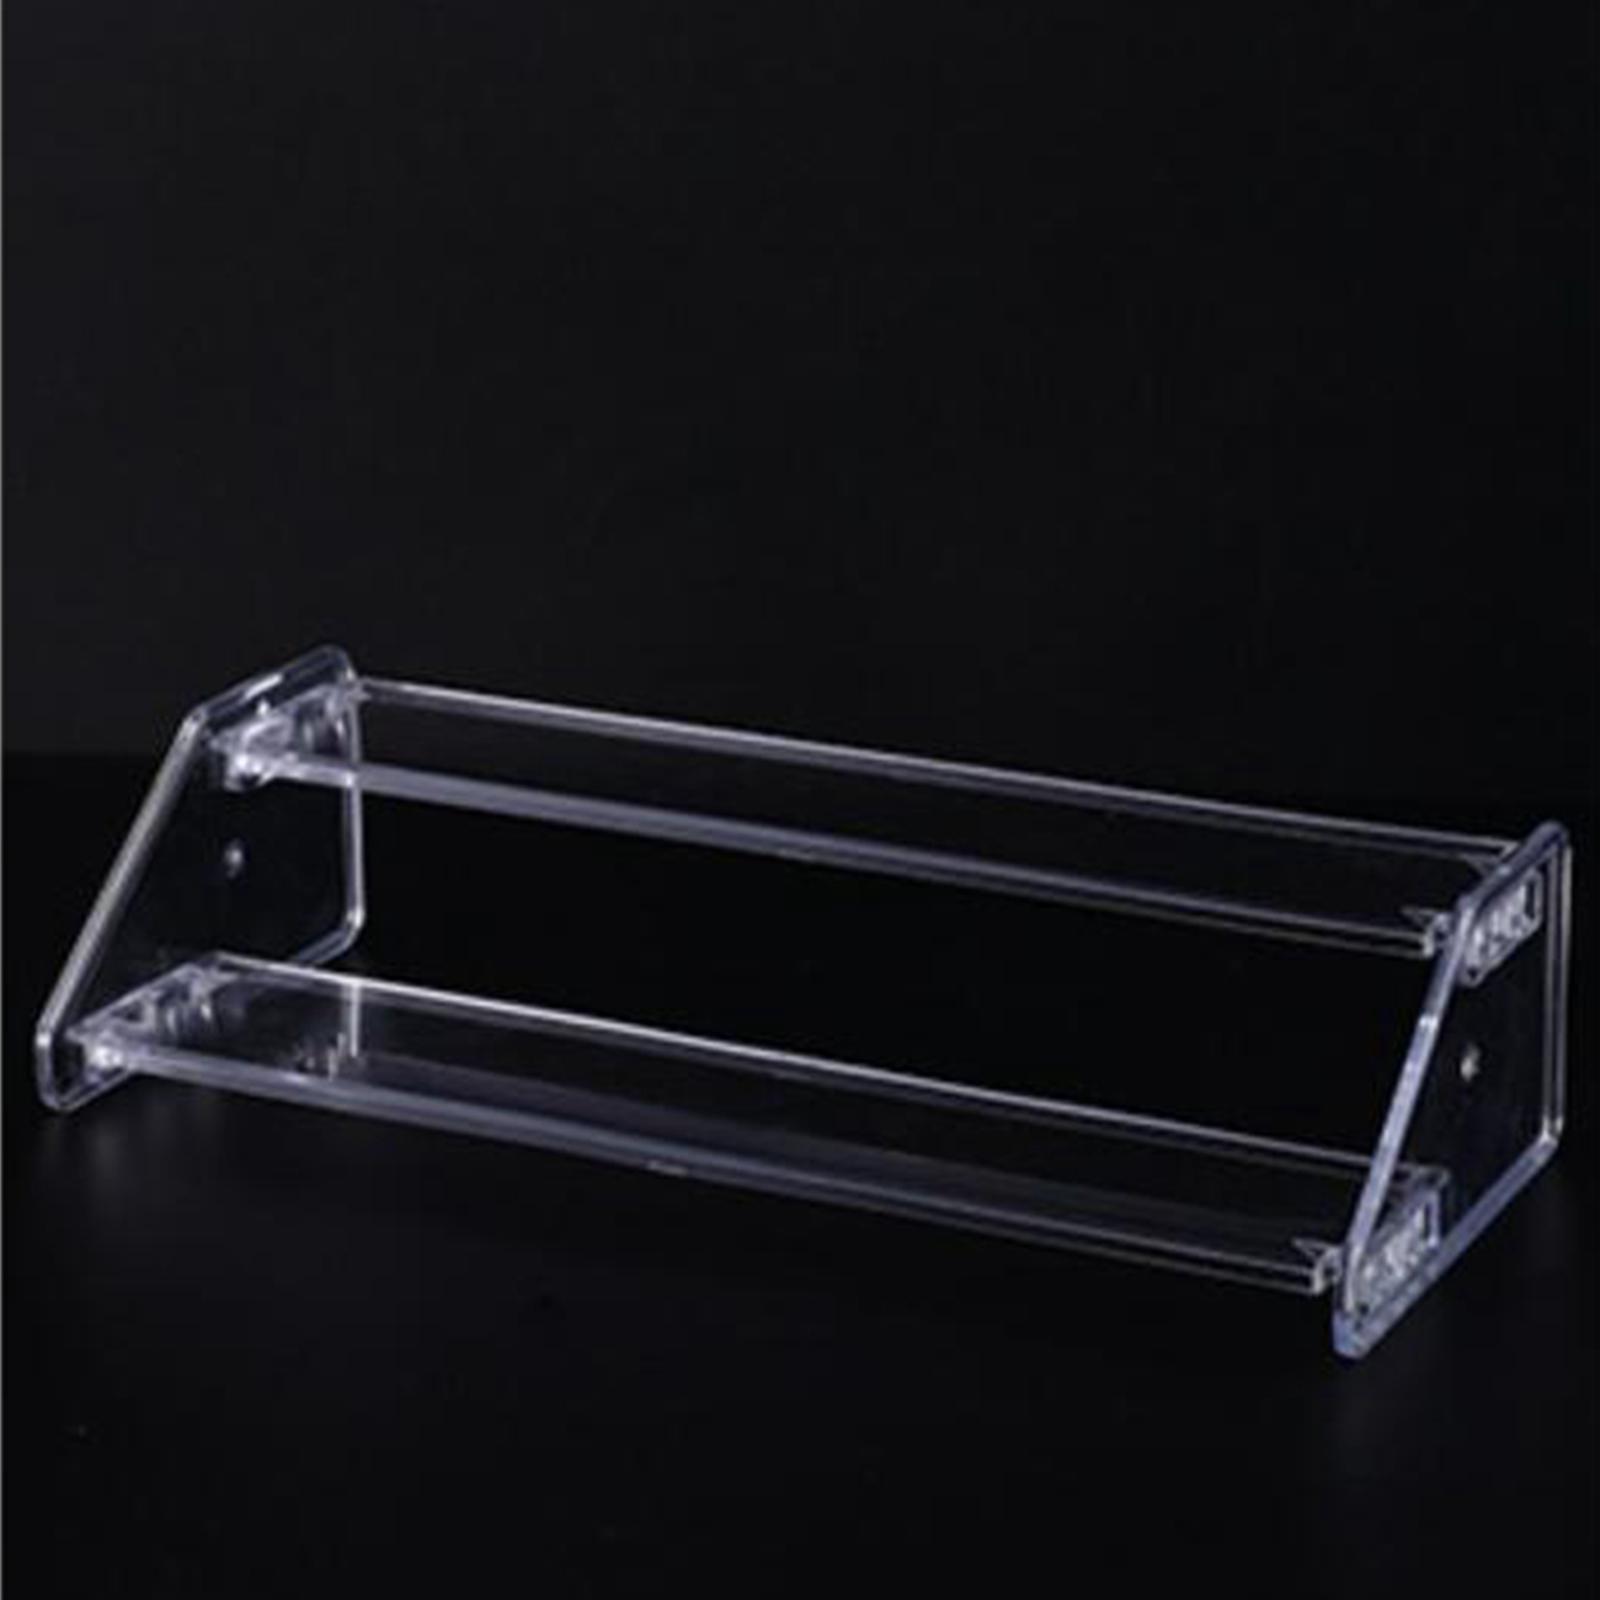 Acrylic Display Riser Multifunctional Storage Tabletop Acrylic Display Riser Jewelry Display Stand for Collectibles Action Figure Dolls Toys